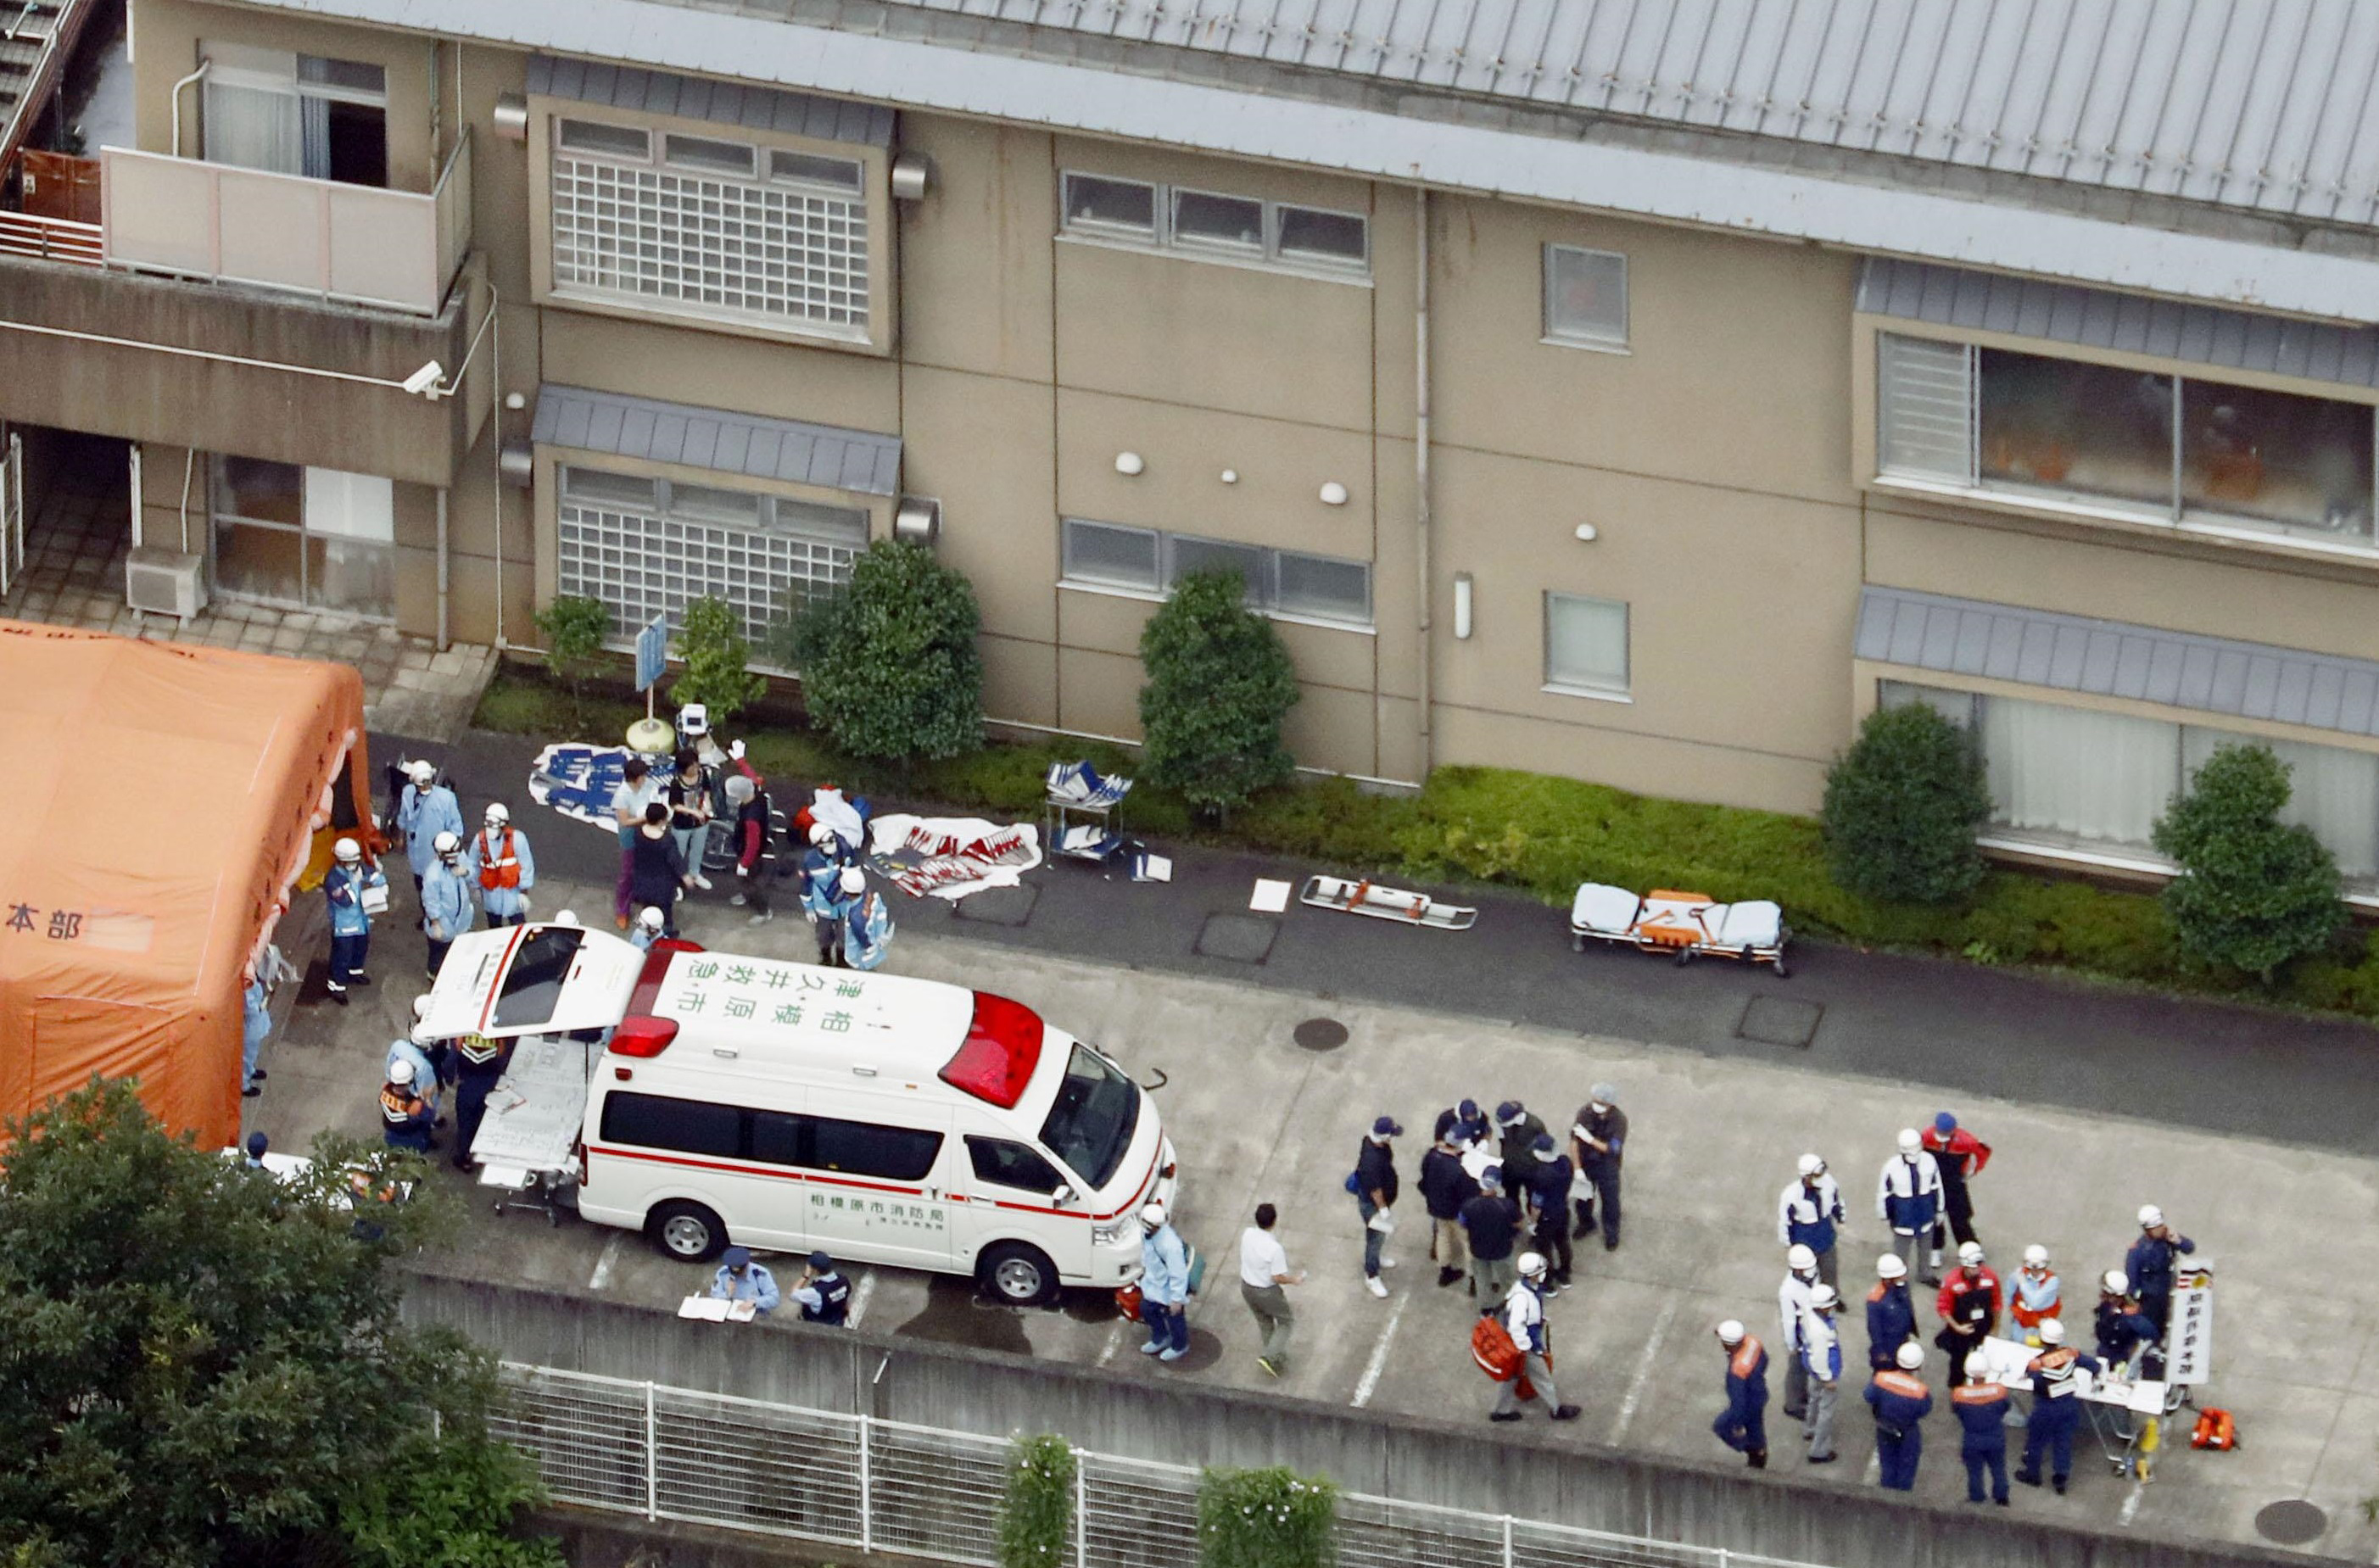 Ambulance personnel and staff at Tsukui Yamayuri En wait outside the care facility in Sagamihara, Kanagawa Prefecture, on Tuesday after a knife-wielding man broke in and killed at least 19 residents. | KYODO